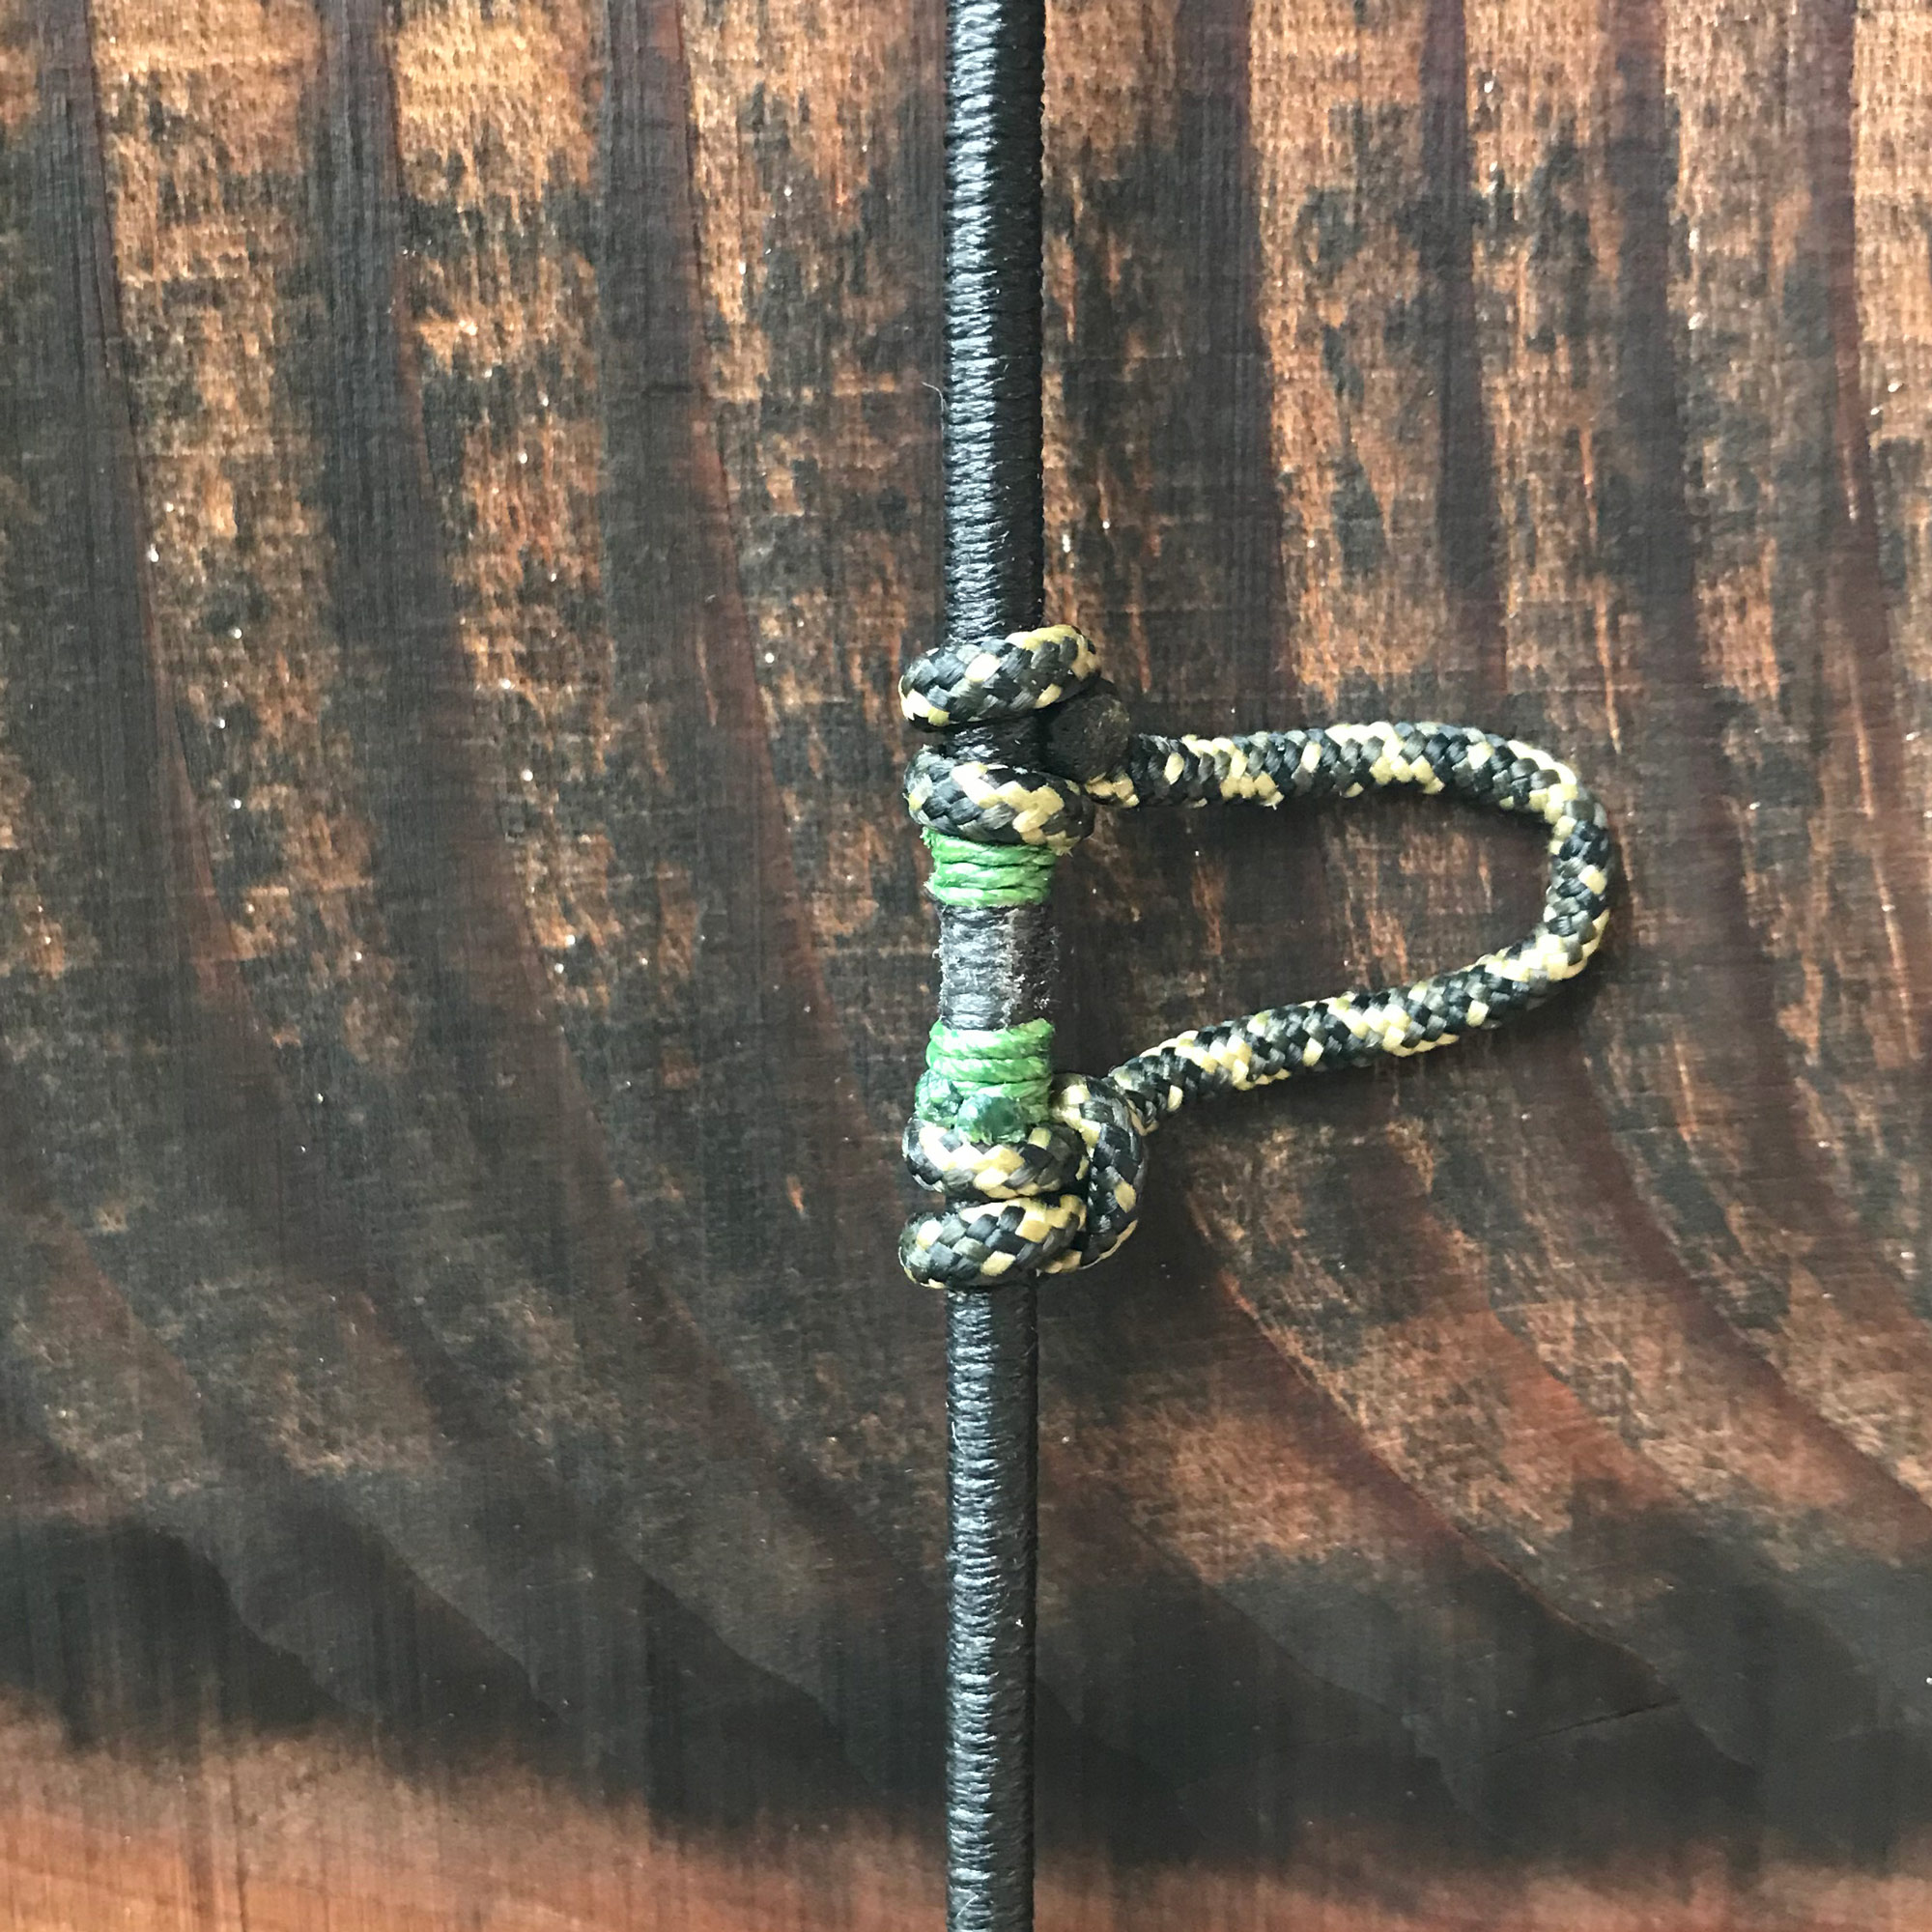 A properly tied in peep sight